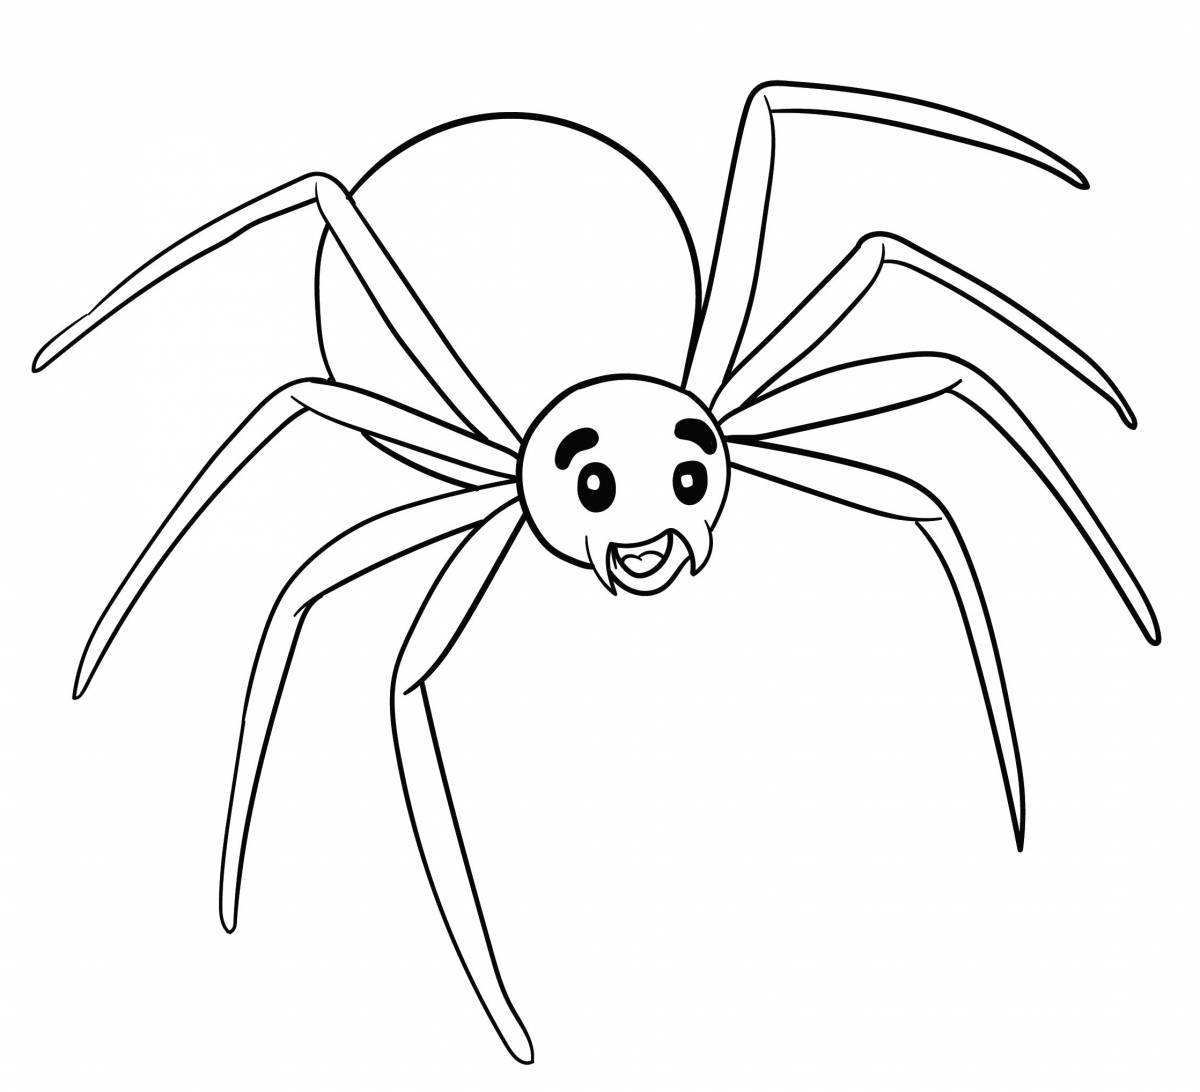 Funny spider coloring for kids